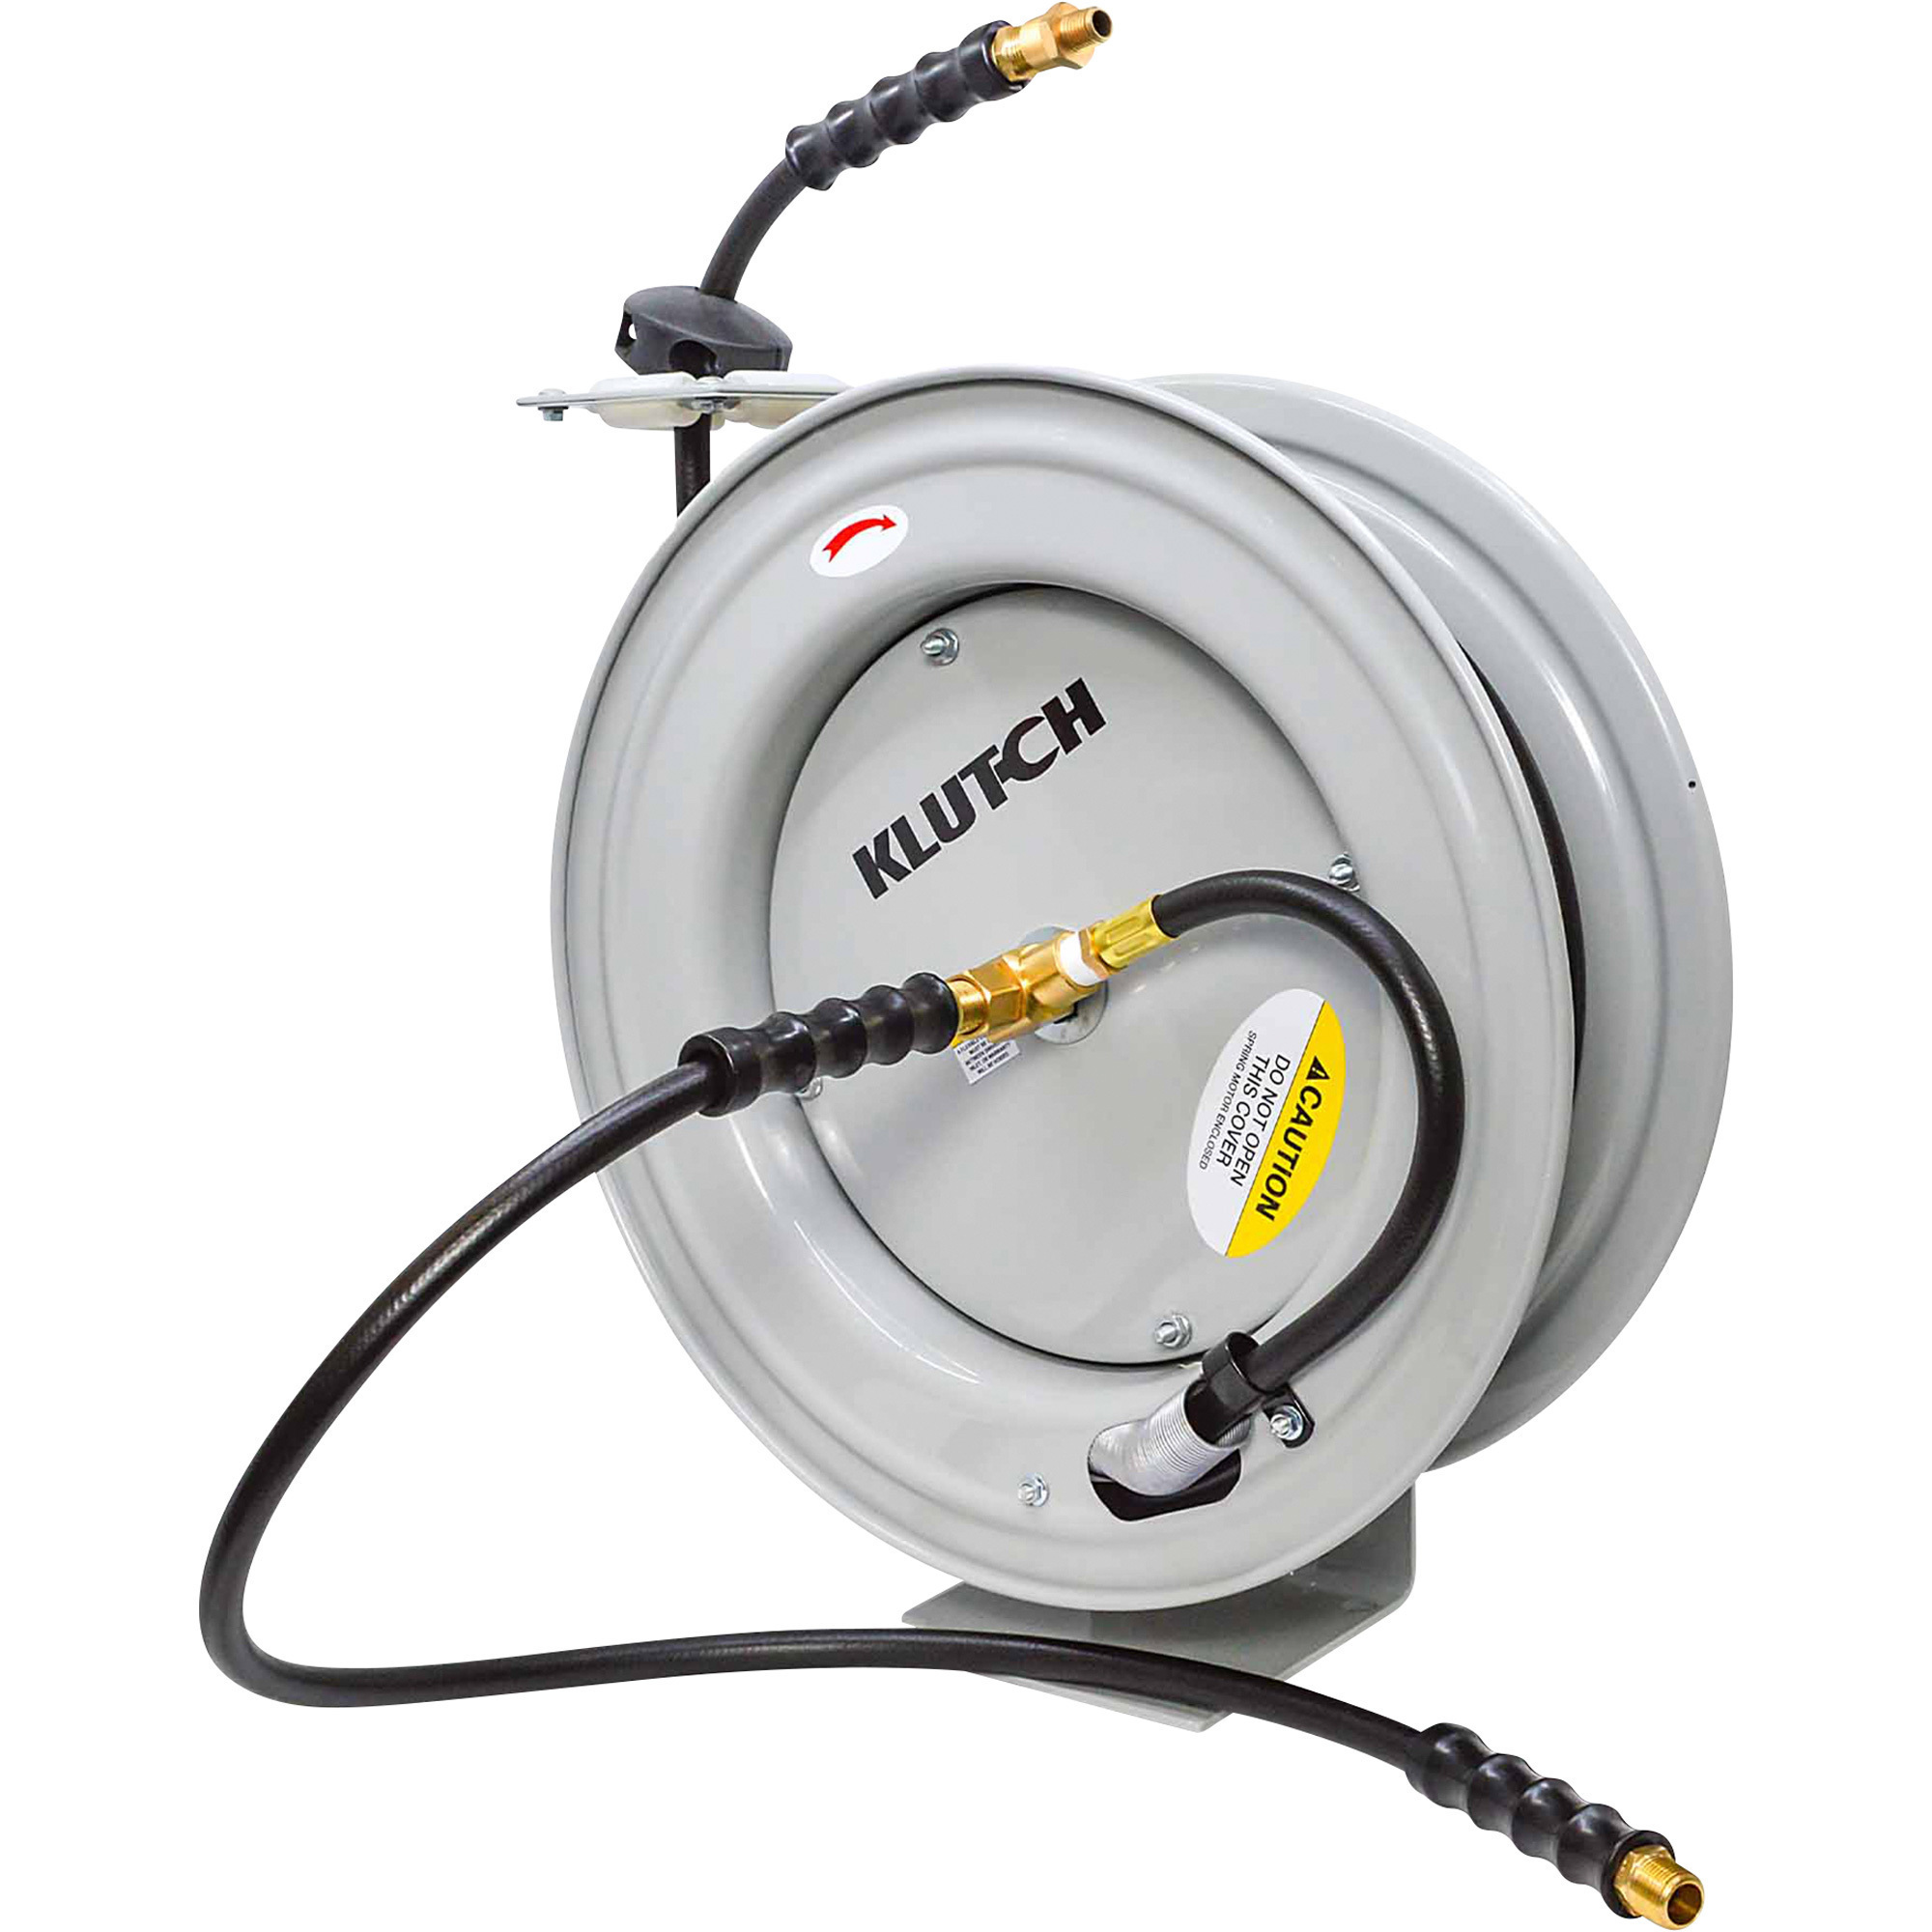 Klutch Auto-Rewind Air Hose Reel, with 3/8in. x 50ft. Rubber Hose, 300 PSI